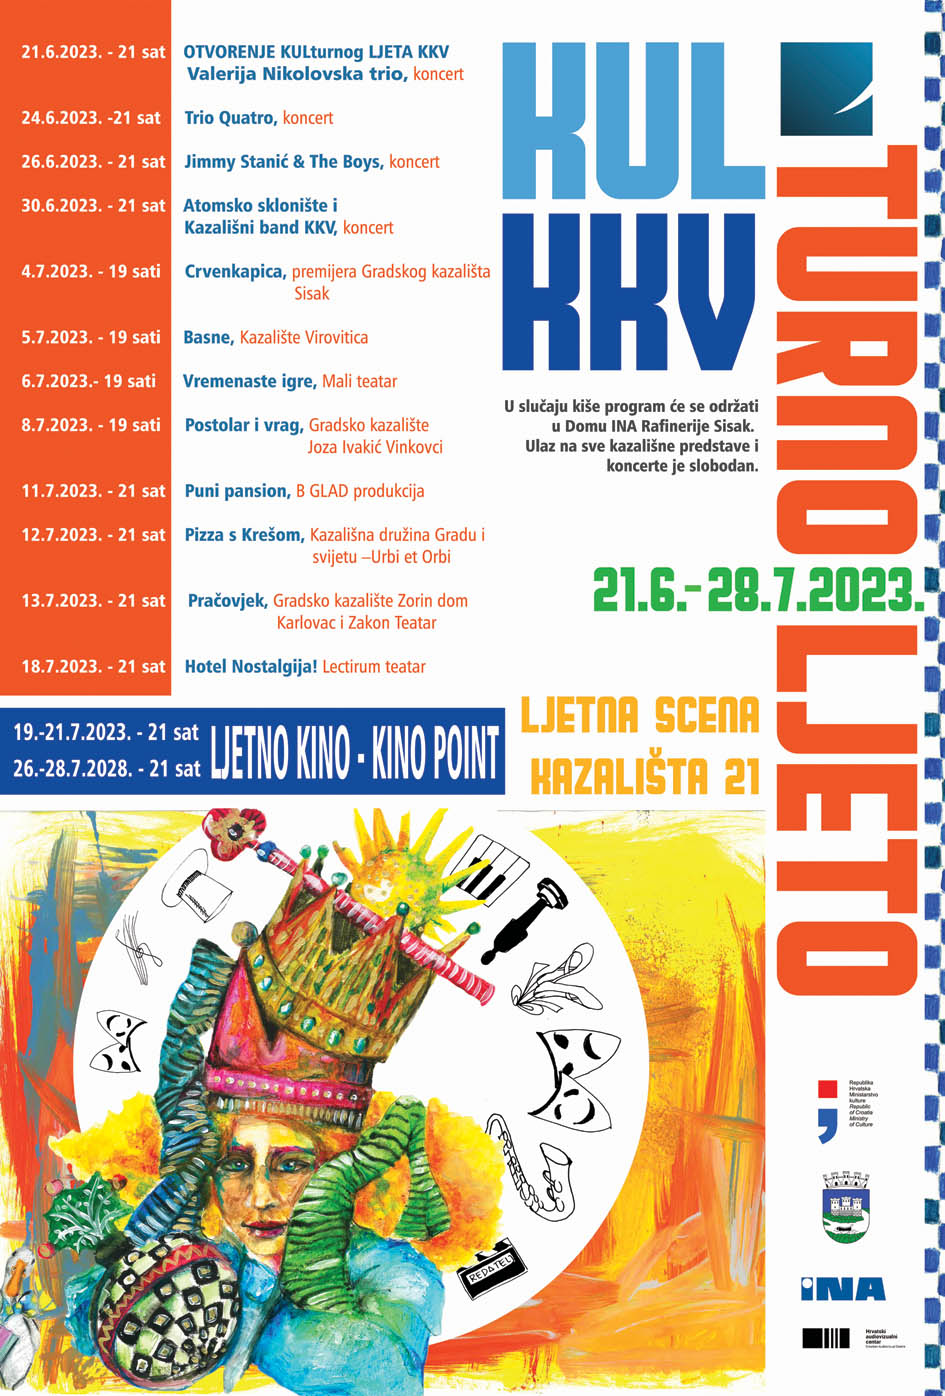 You are currently viewing KULturno LJETO KKV-a